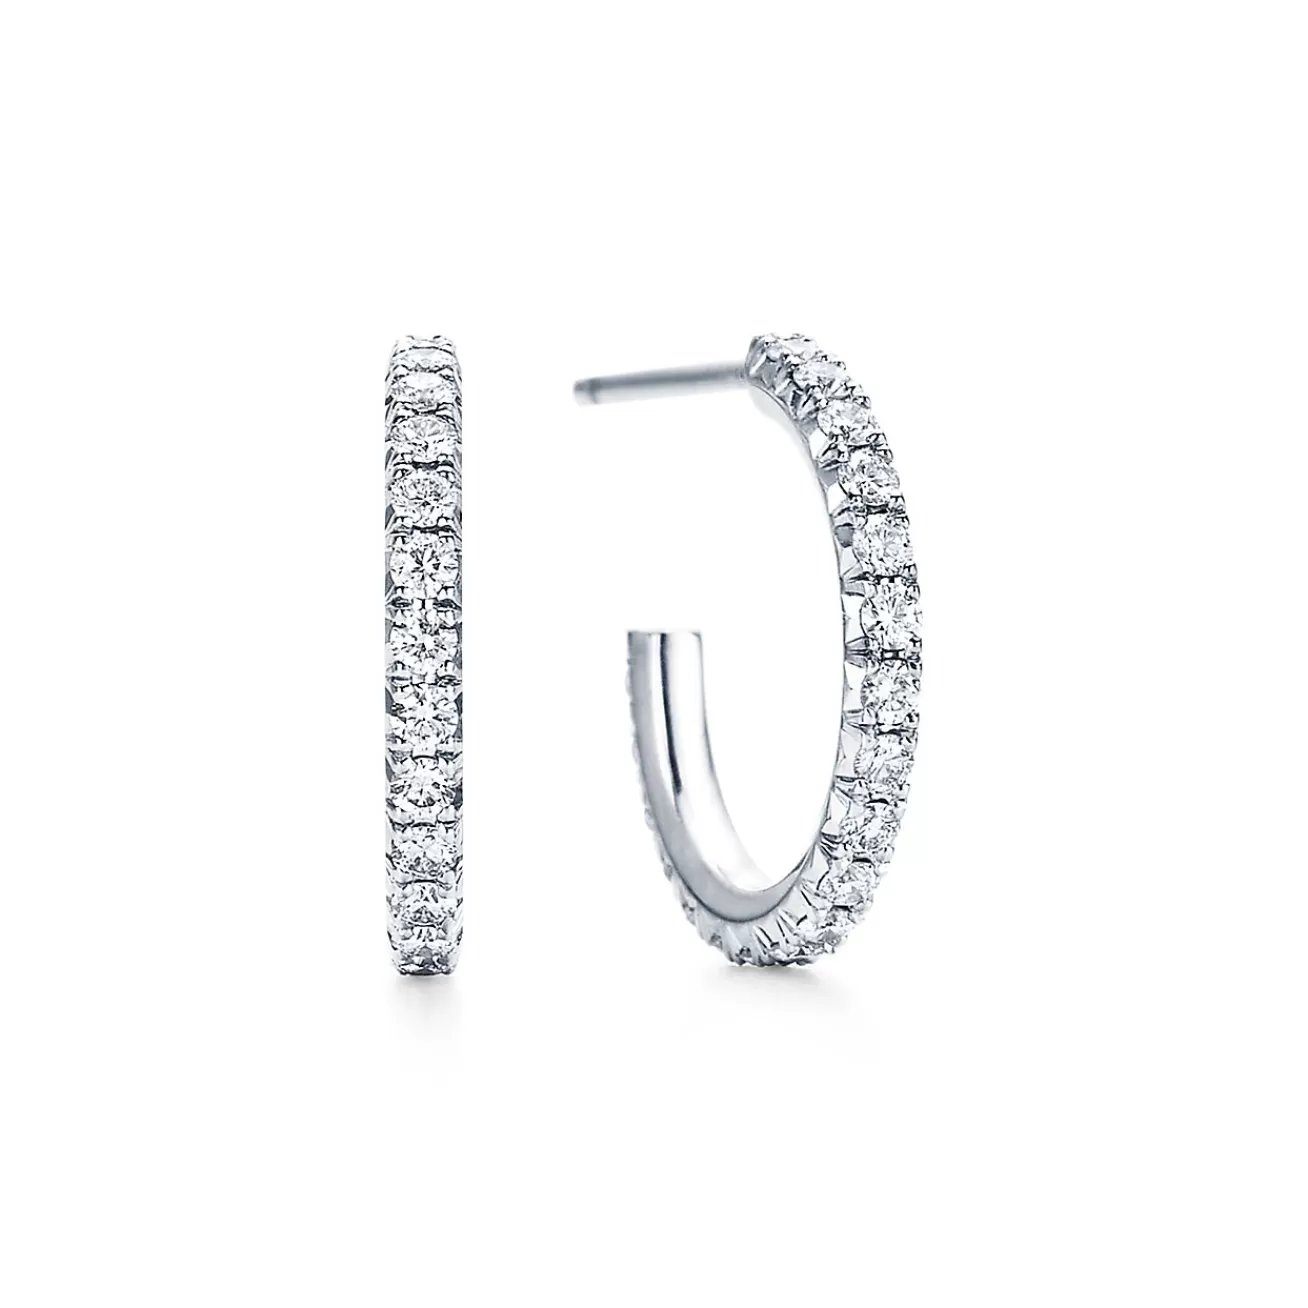 Tiffany & Co. Tiffany Metro hoop earrings in 18k white gold with diamonds, small. | ^ Earrings | Gifts for Her